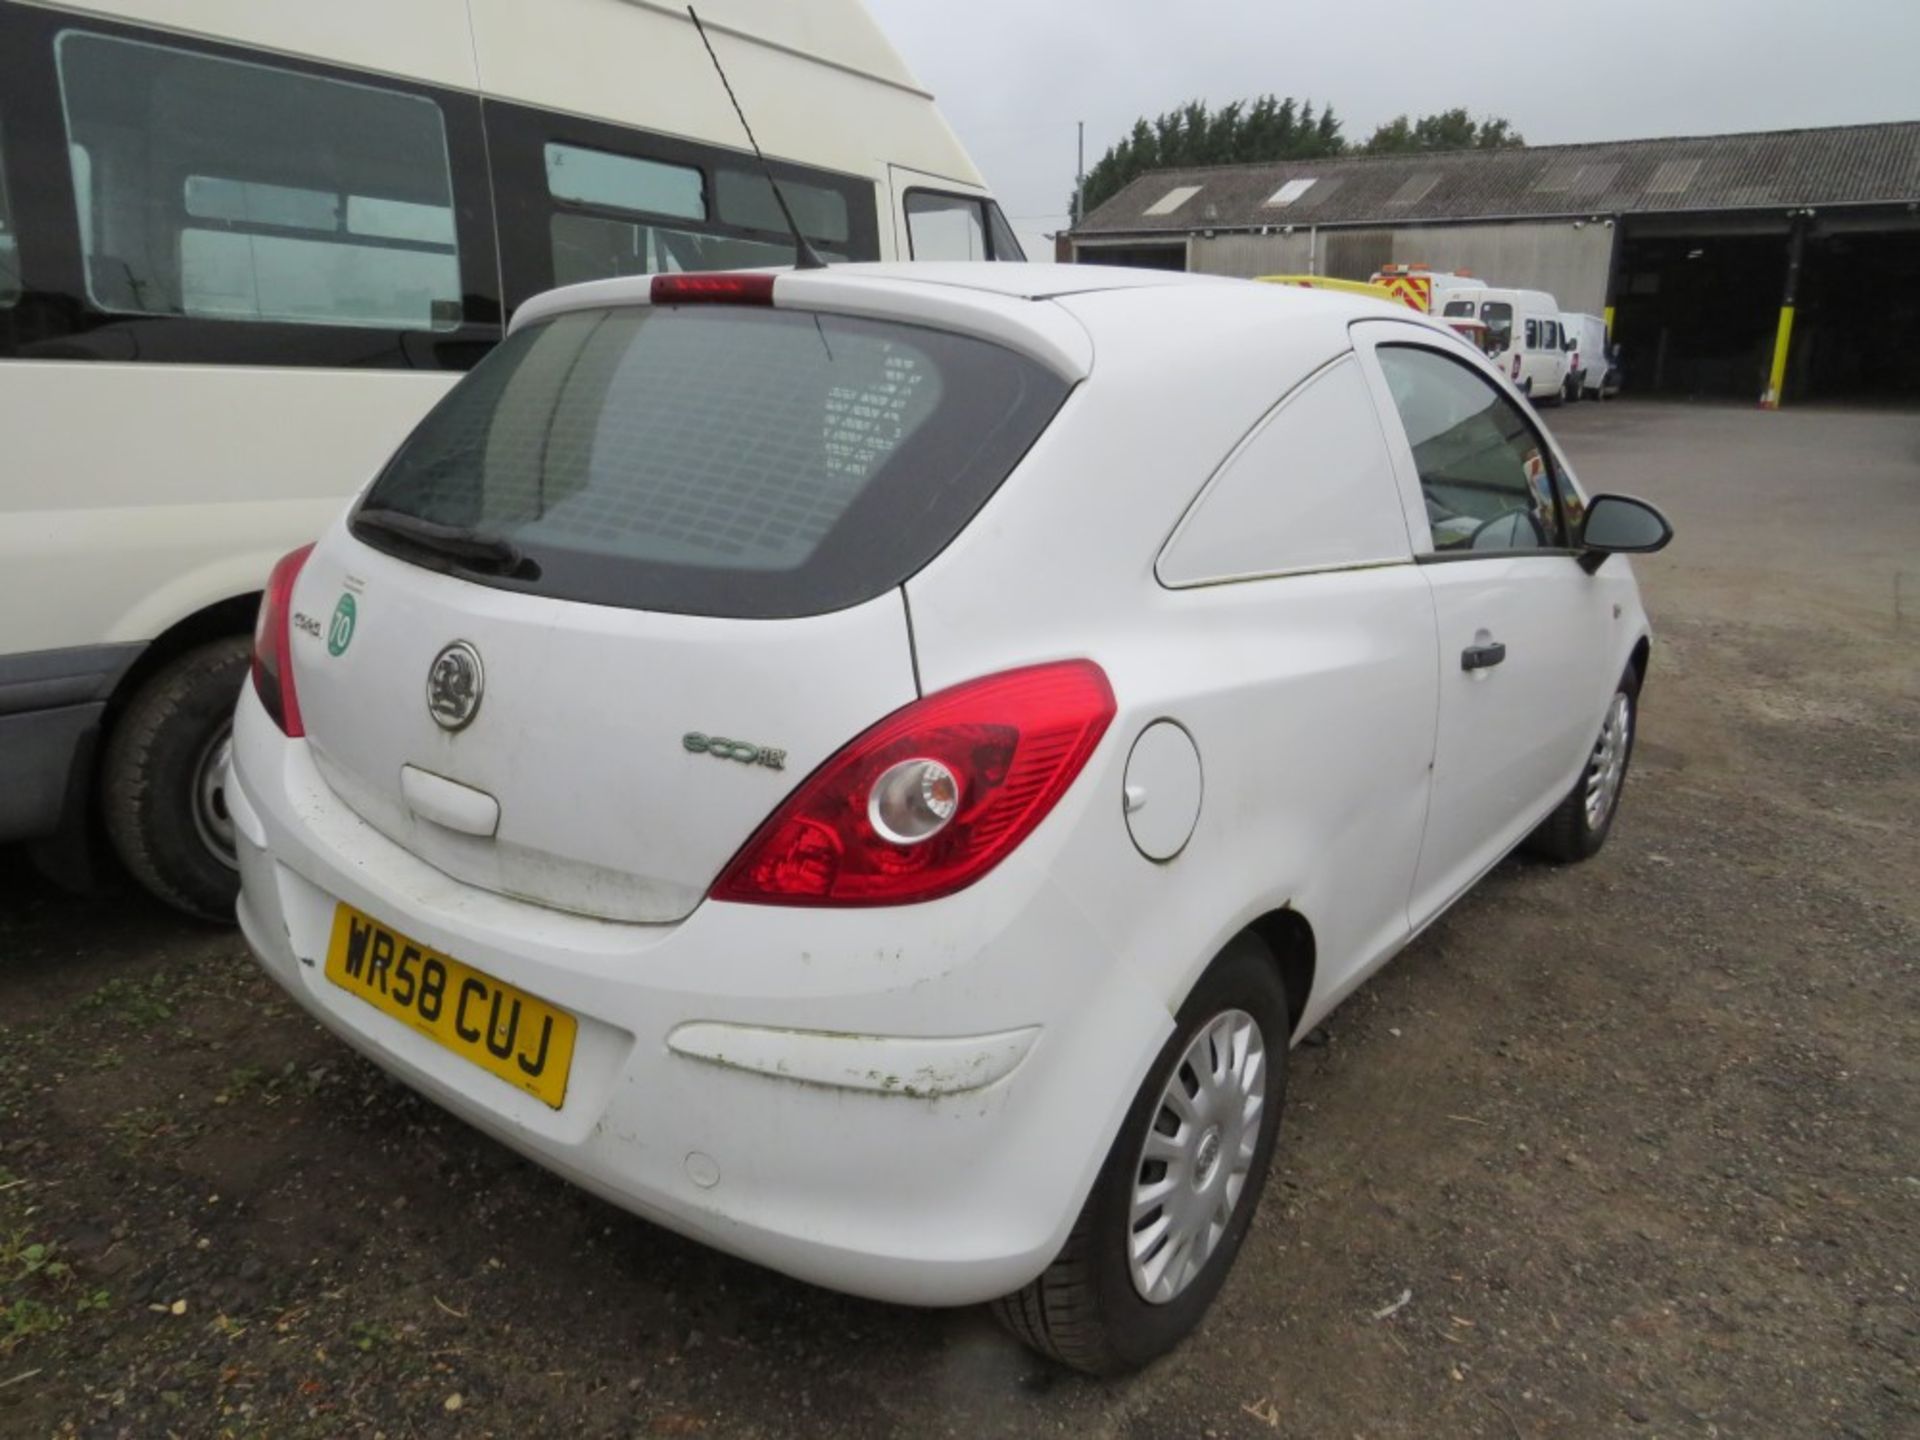 58 reg VAUXHALL CORSA CDTI VAN, 1ST REG 12/08, 73424M NOT WARRANTED, V5 HERE, 1 OWNER FROM NEW ( - Image 4 of 5